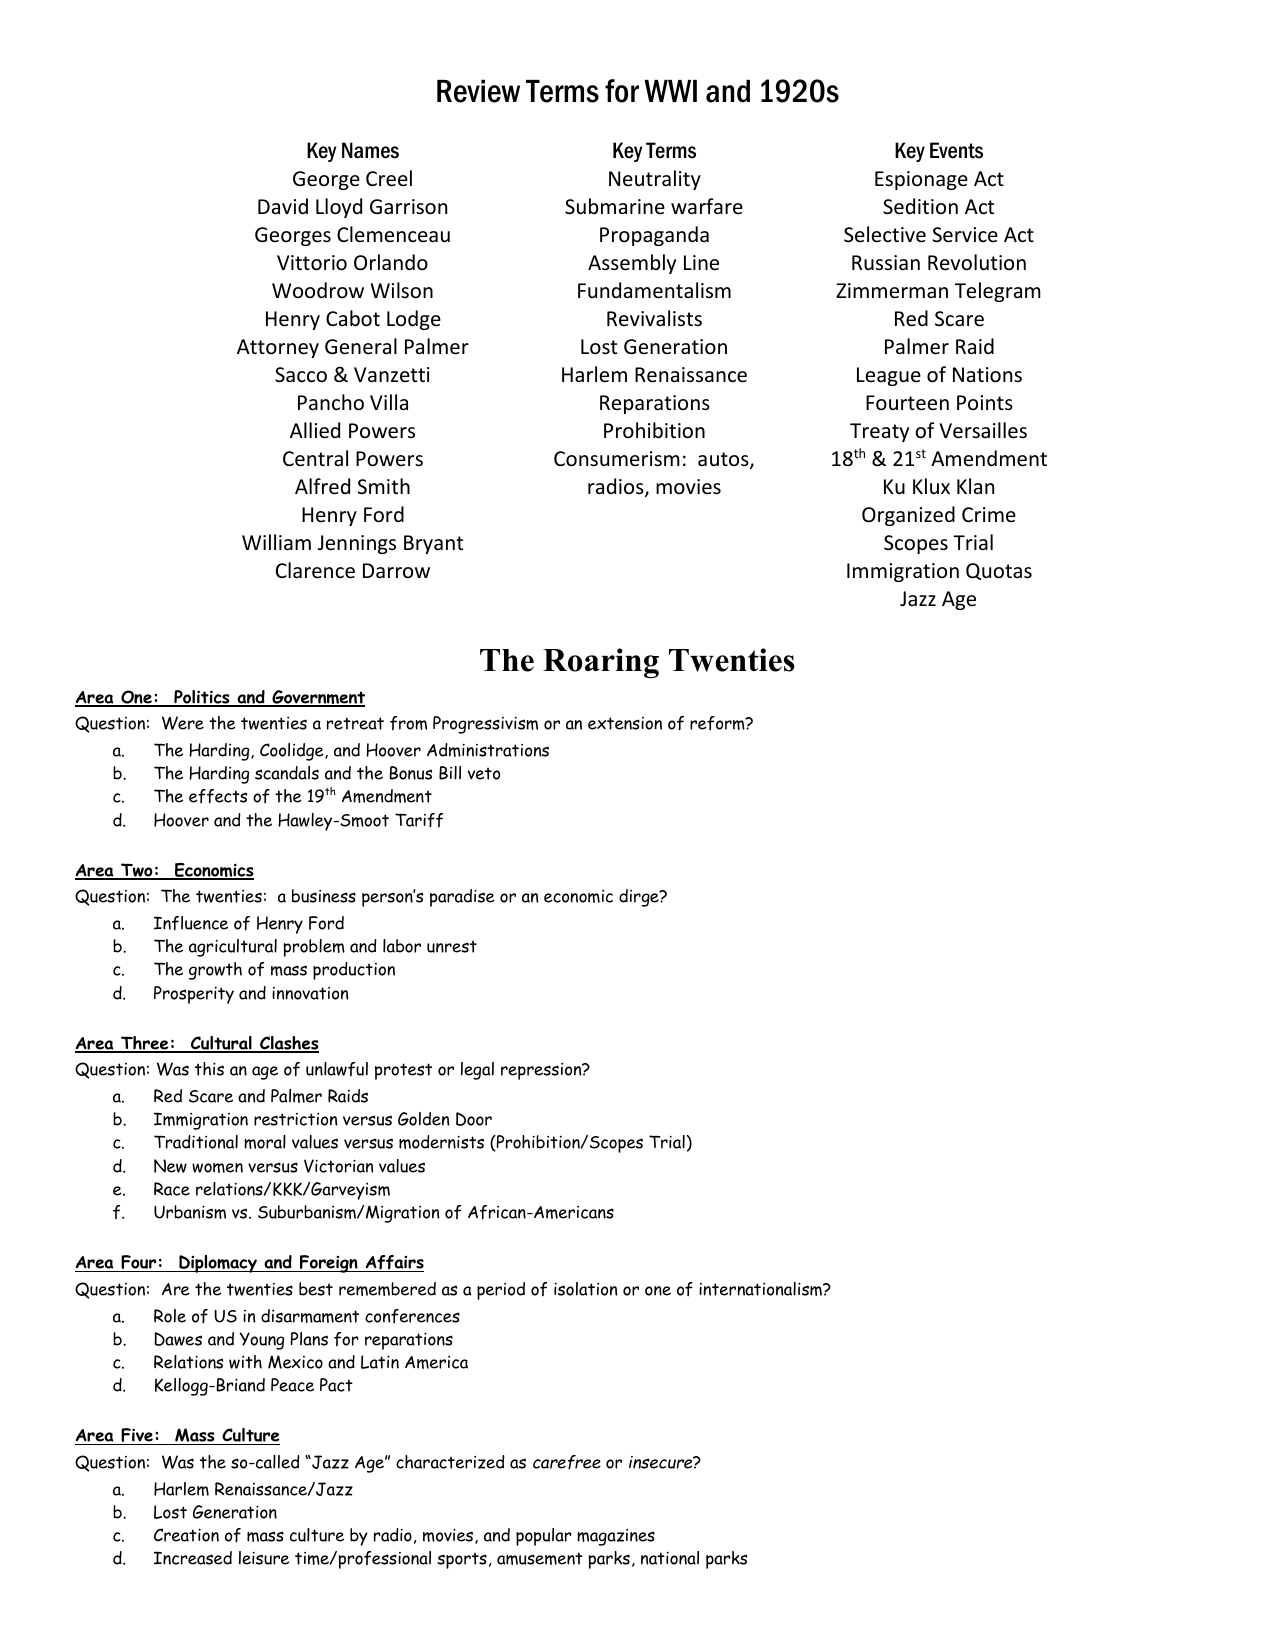 The Roaring Twenties The Business Of America Worksheet Answers - A